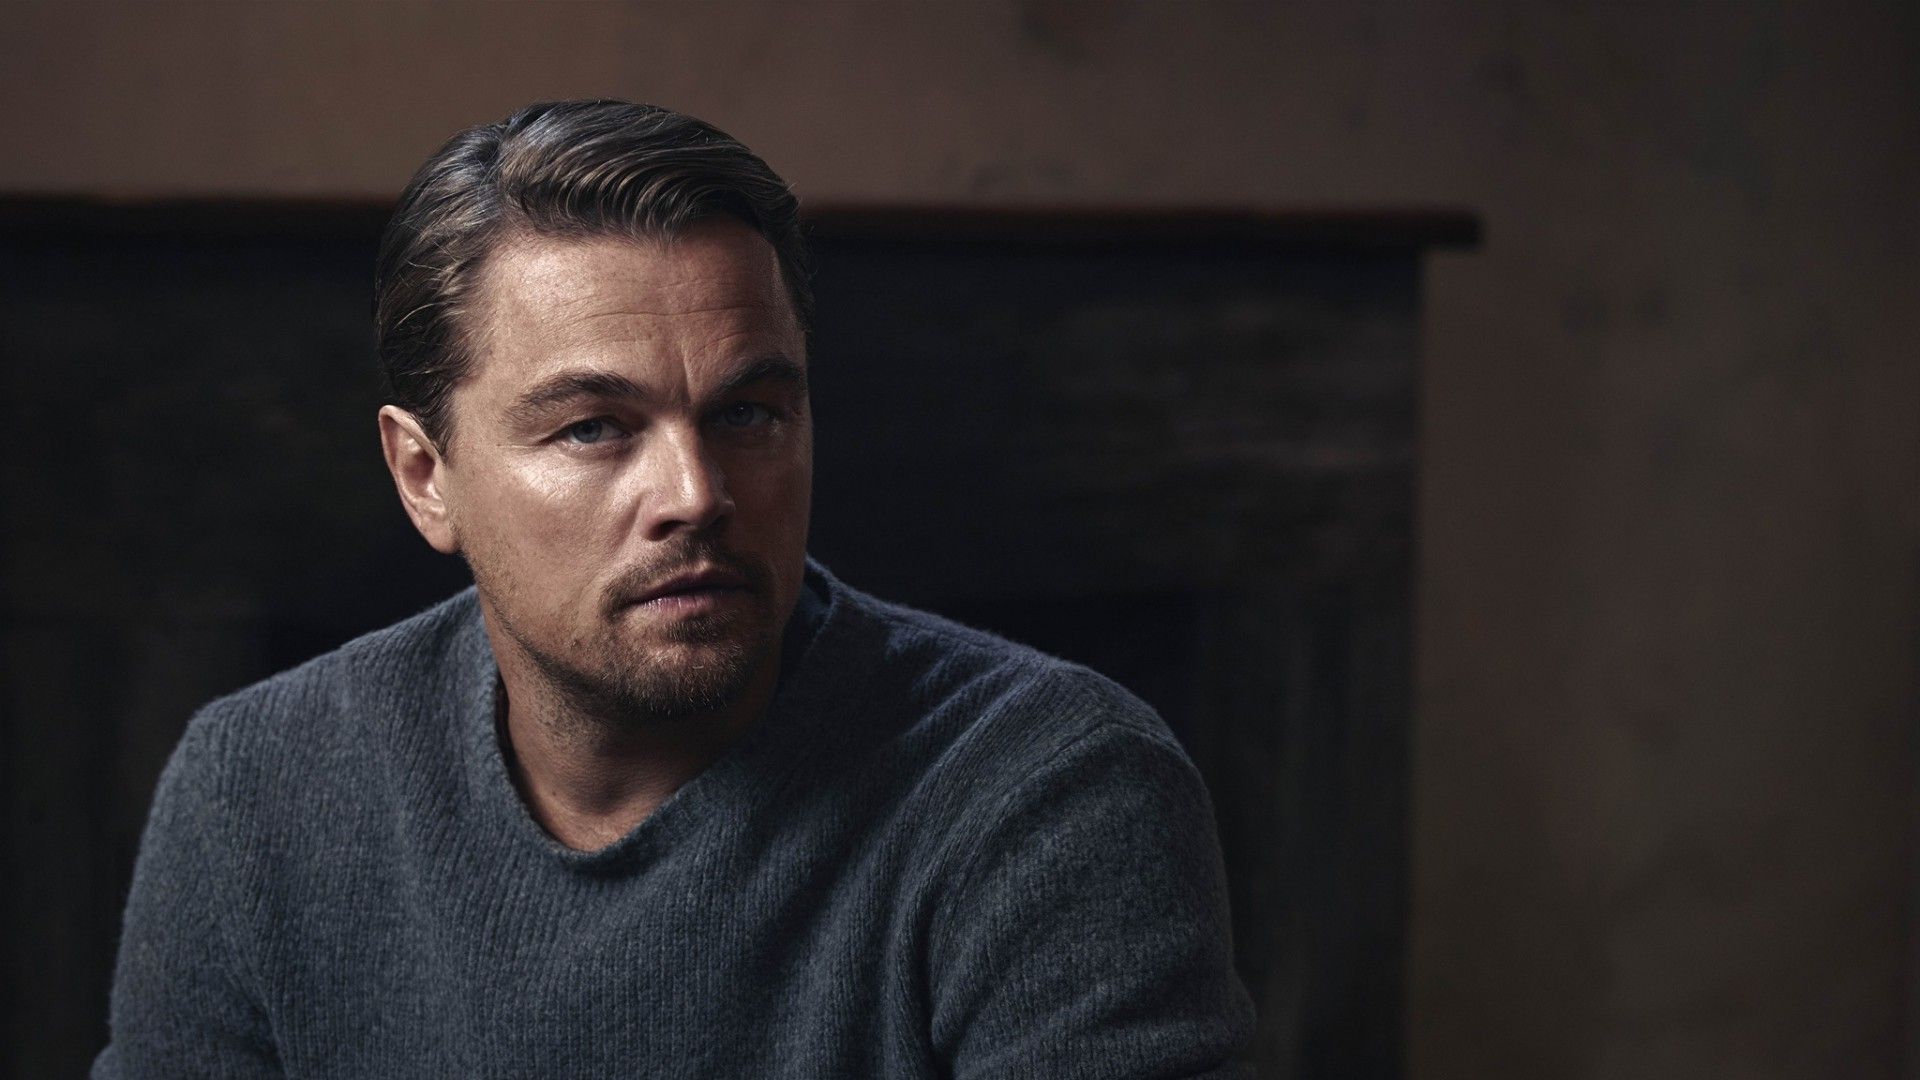 Wallpaper, men, face, portrait, depth of field, looking at viewer, actor, sweater, Leonardo DiCaprio, Person, man, male, screenshot, 1920x1080 px, facial hair 1920x1080